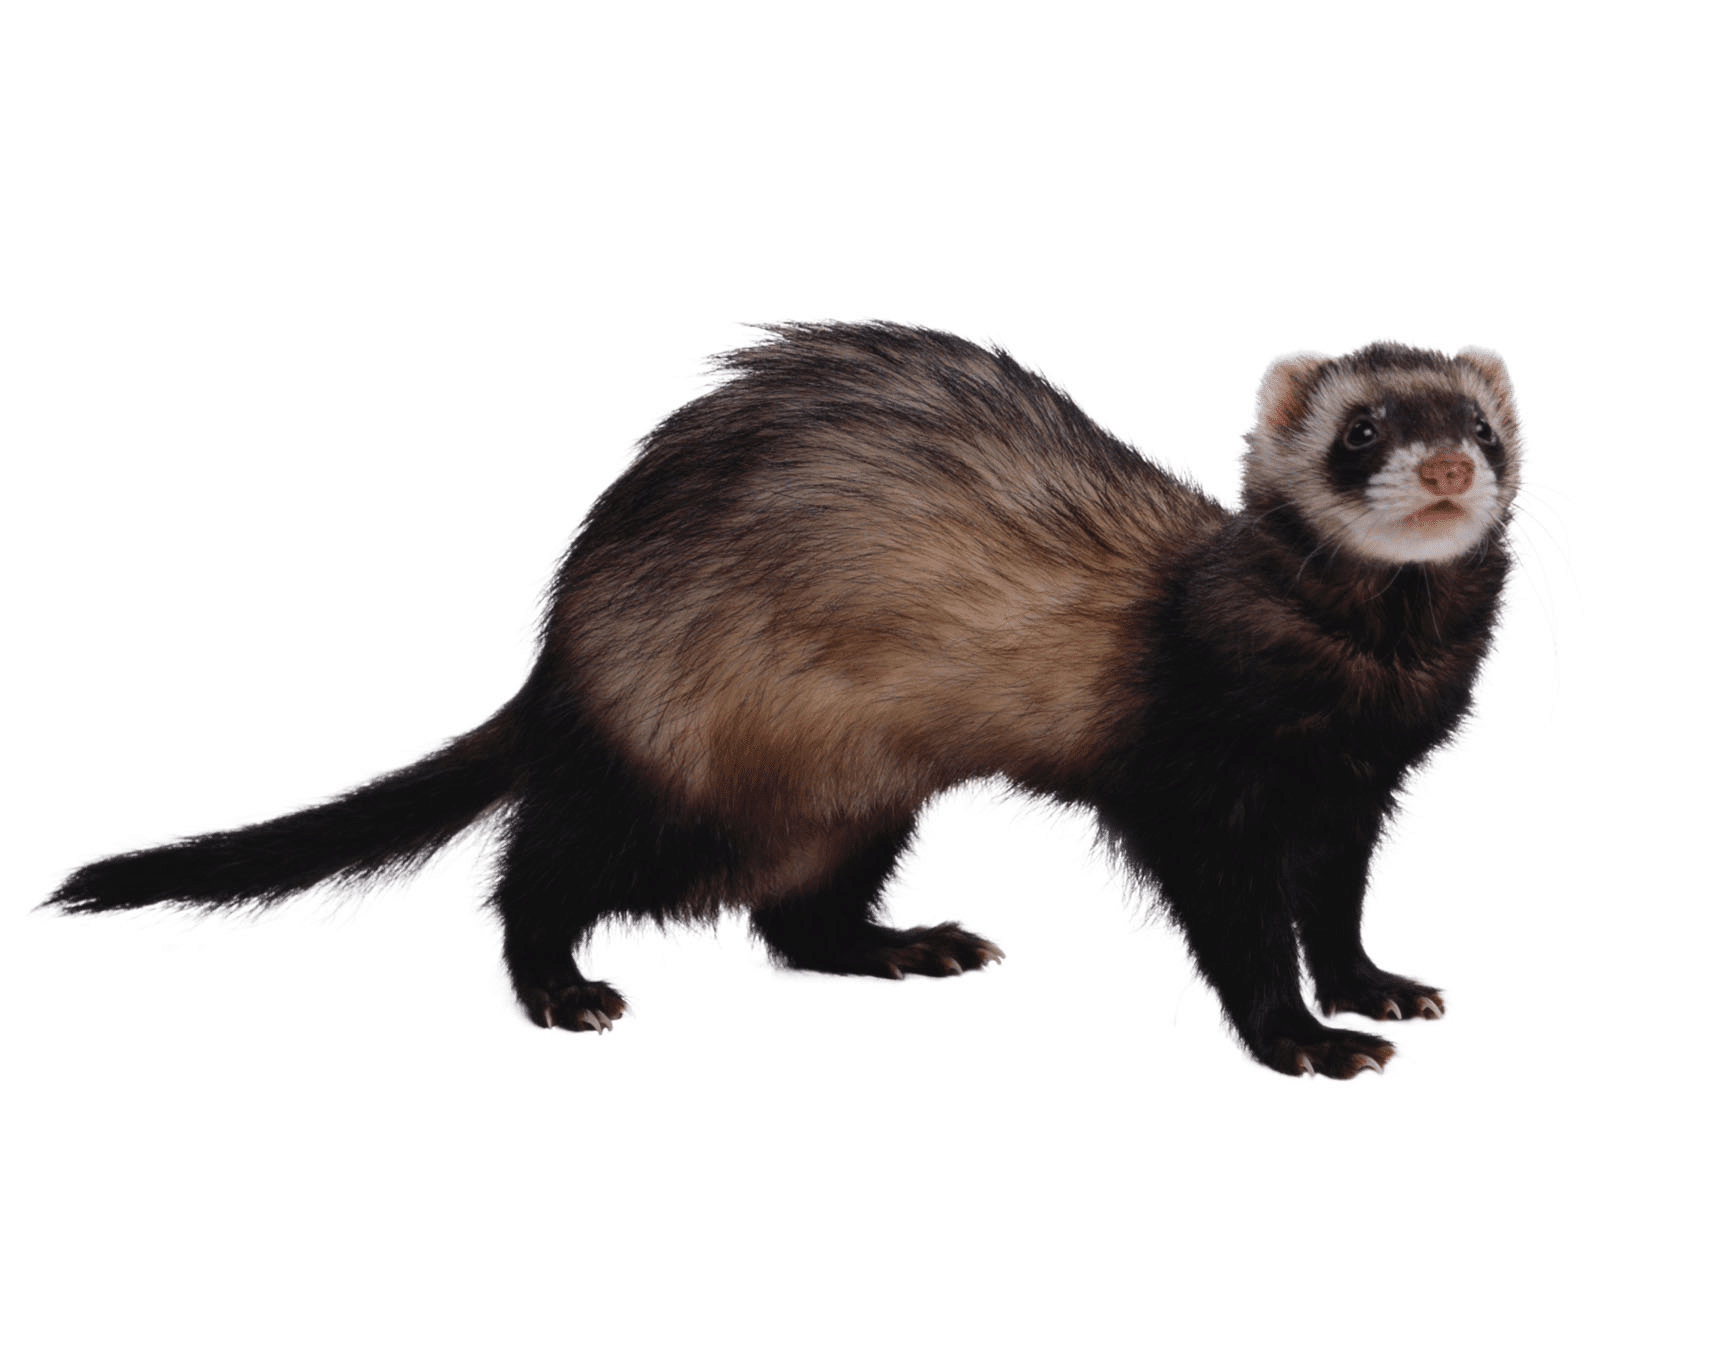 Ferrets are in fact members of the weasel family, which includes skunks and...